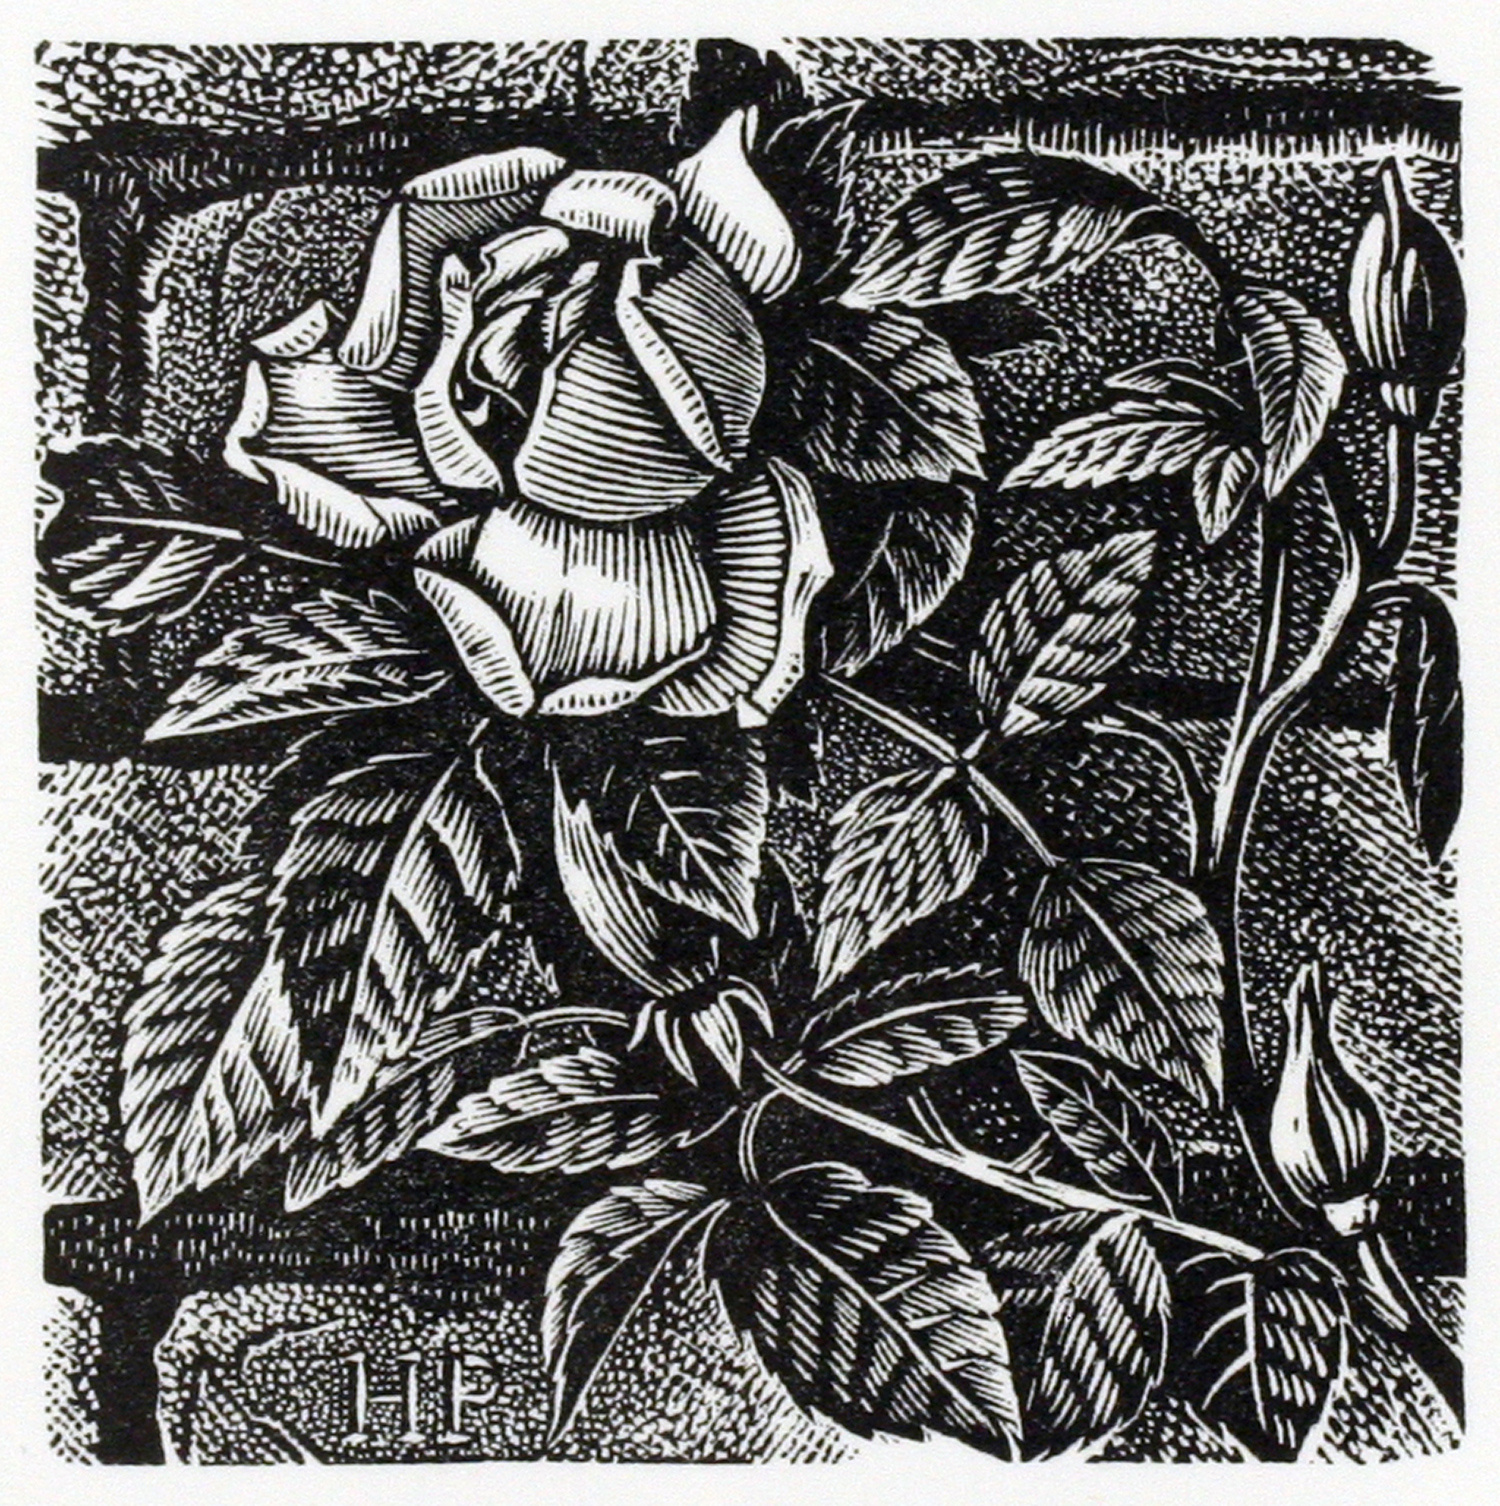 Climbing Rose by Howard Phipps